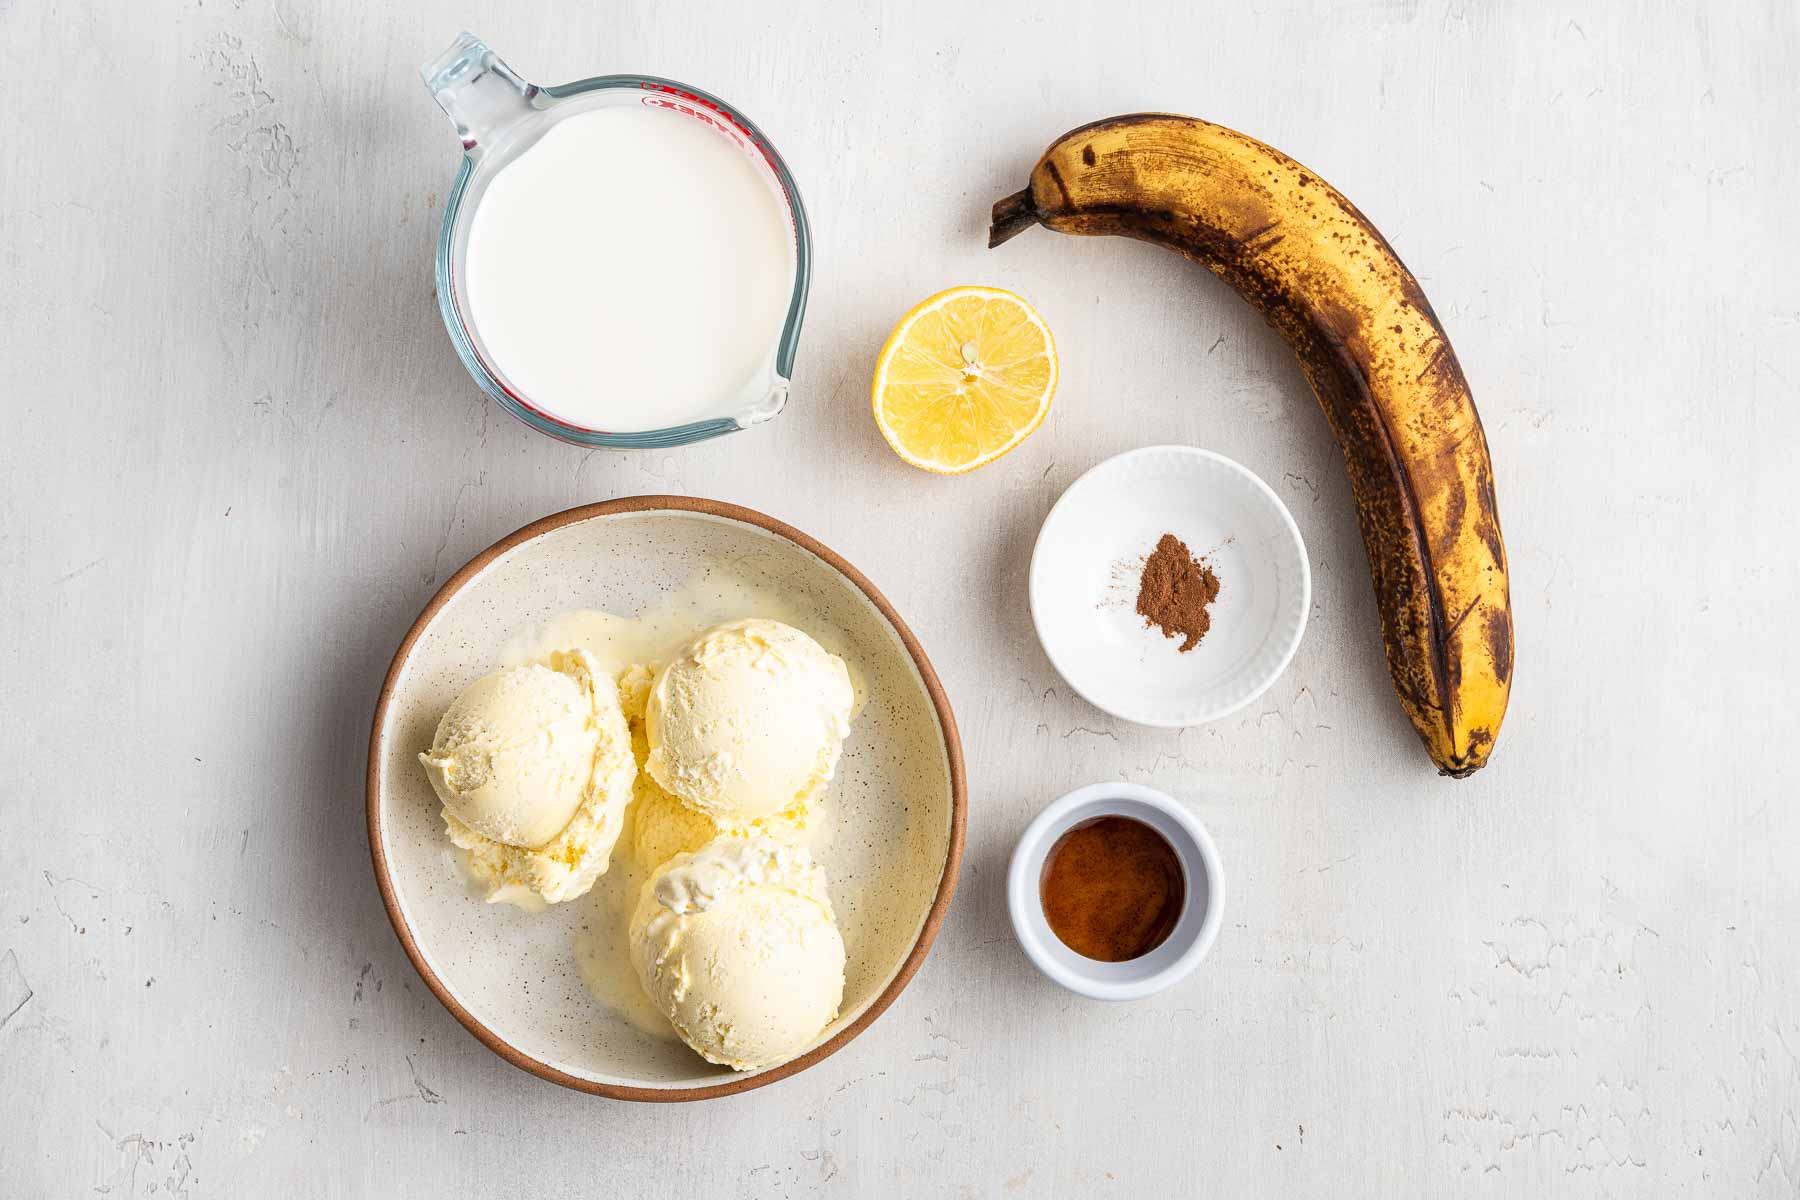 Bowl with scoops of ice cream, one banana, vanilla and milk on grey countertop.